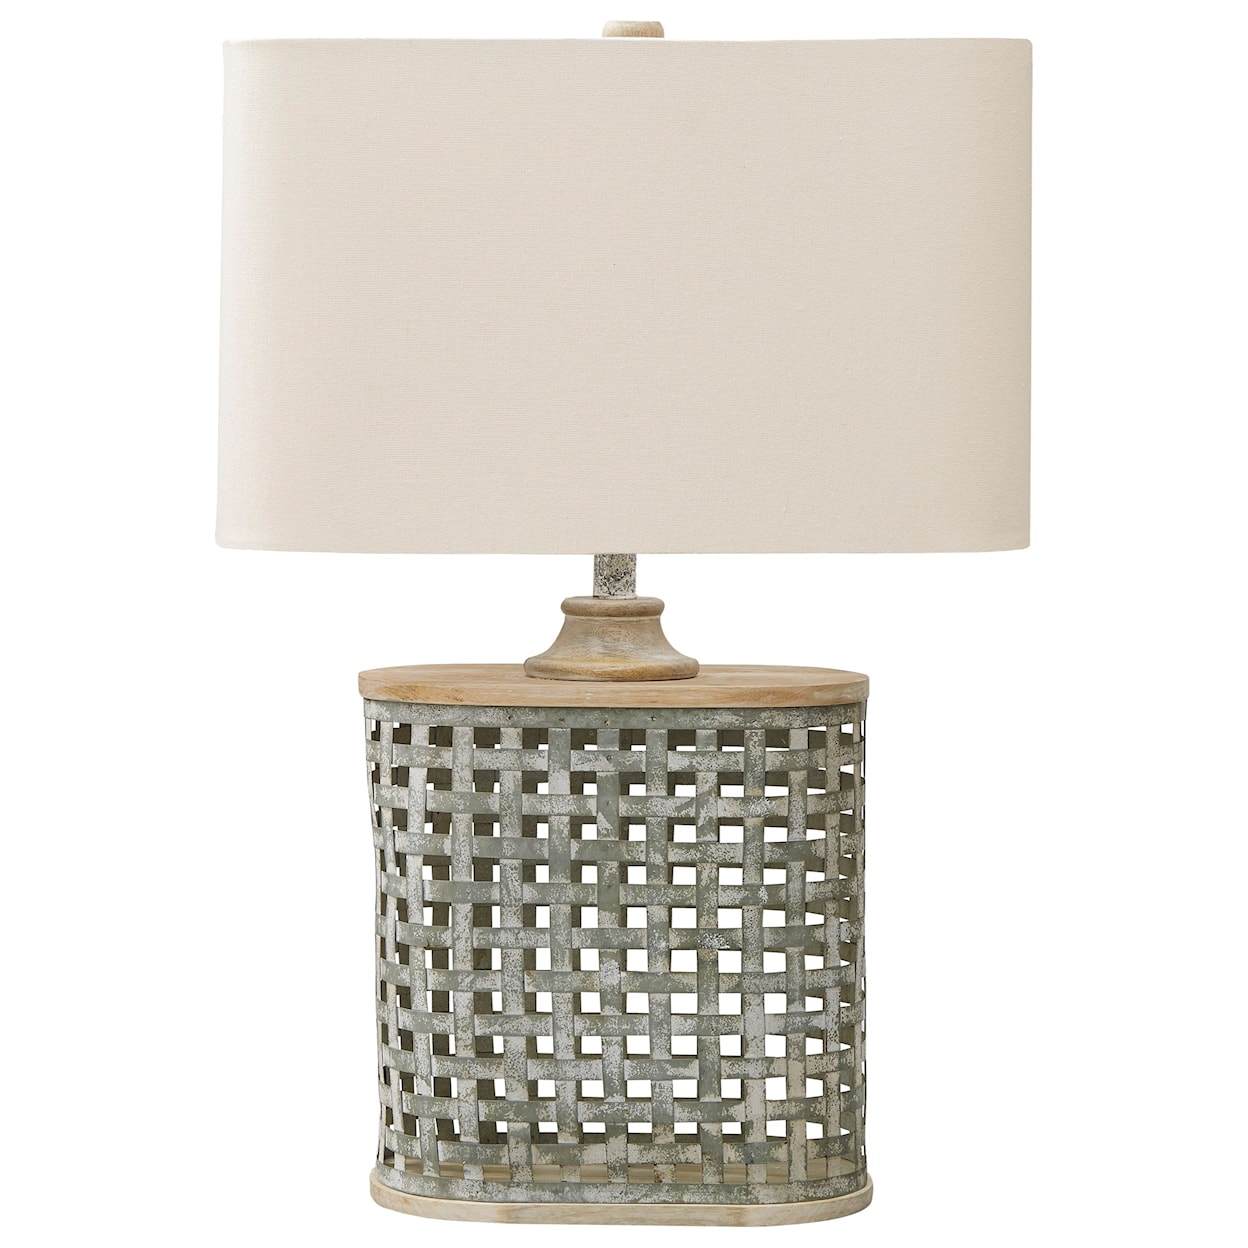 Signature Design by Ashley Lamps - Casual Deondra Gray Metal Table Lamp